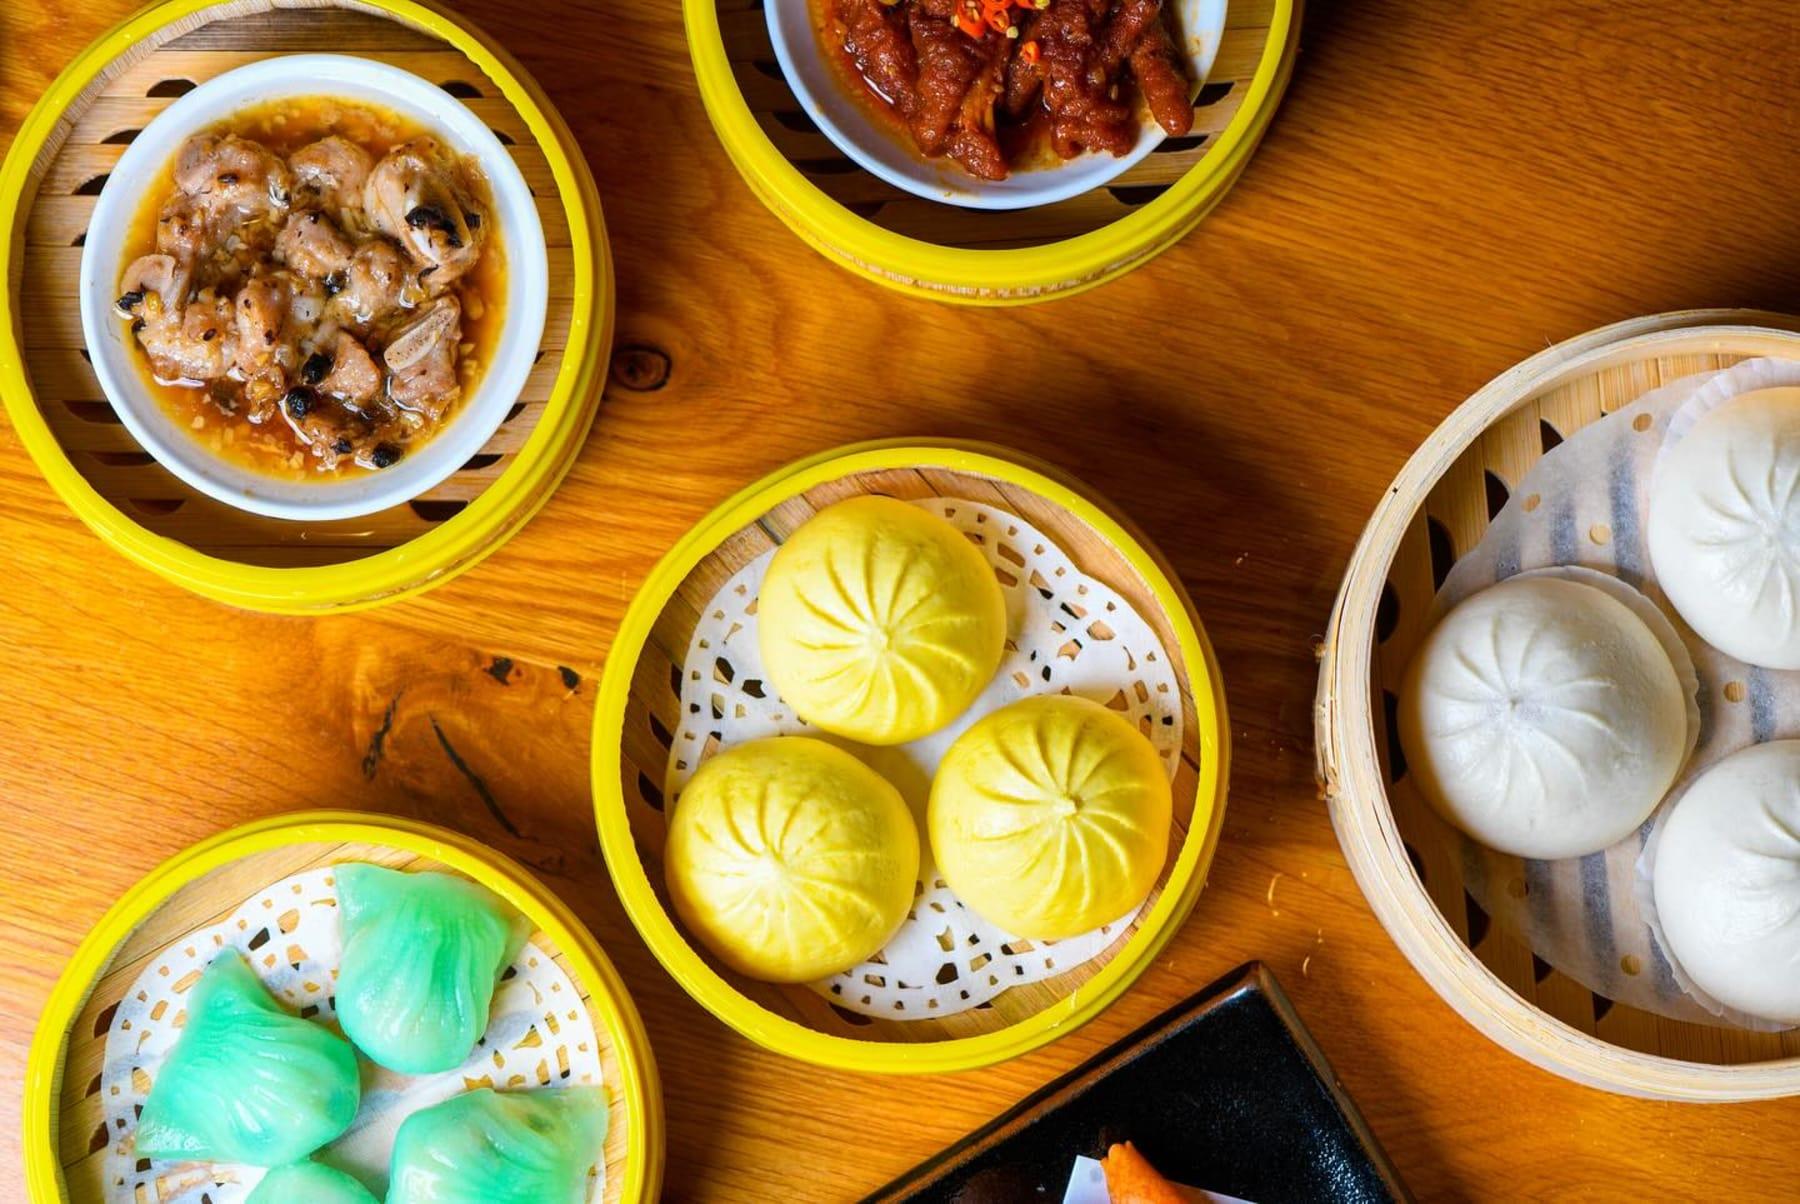 We’re now serving Dim Sum! Enjoy a wide selection ranging from sweet fillings to those classic savory favorites! 